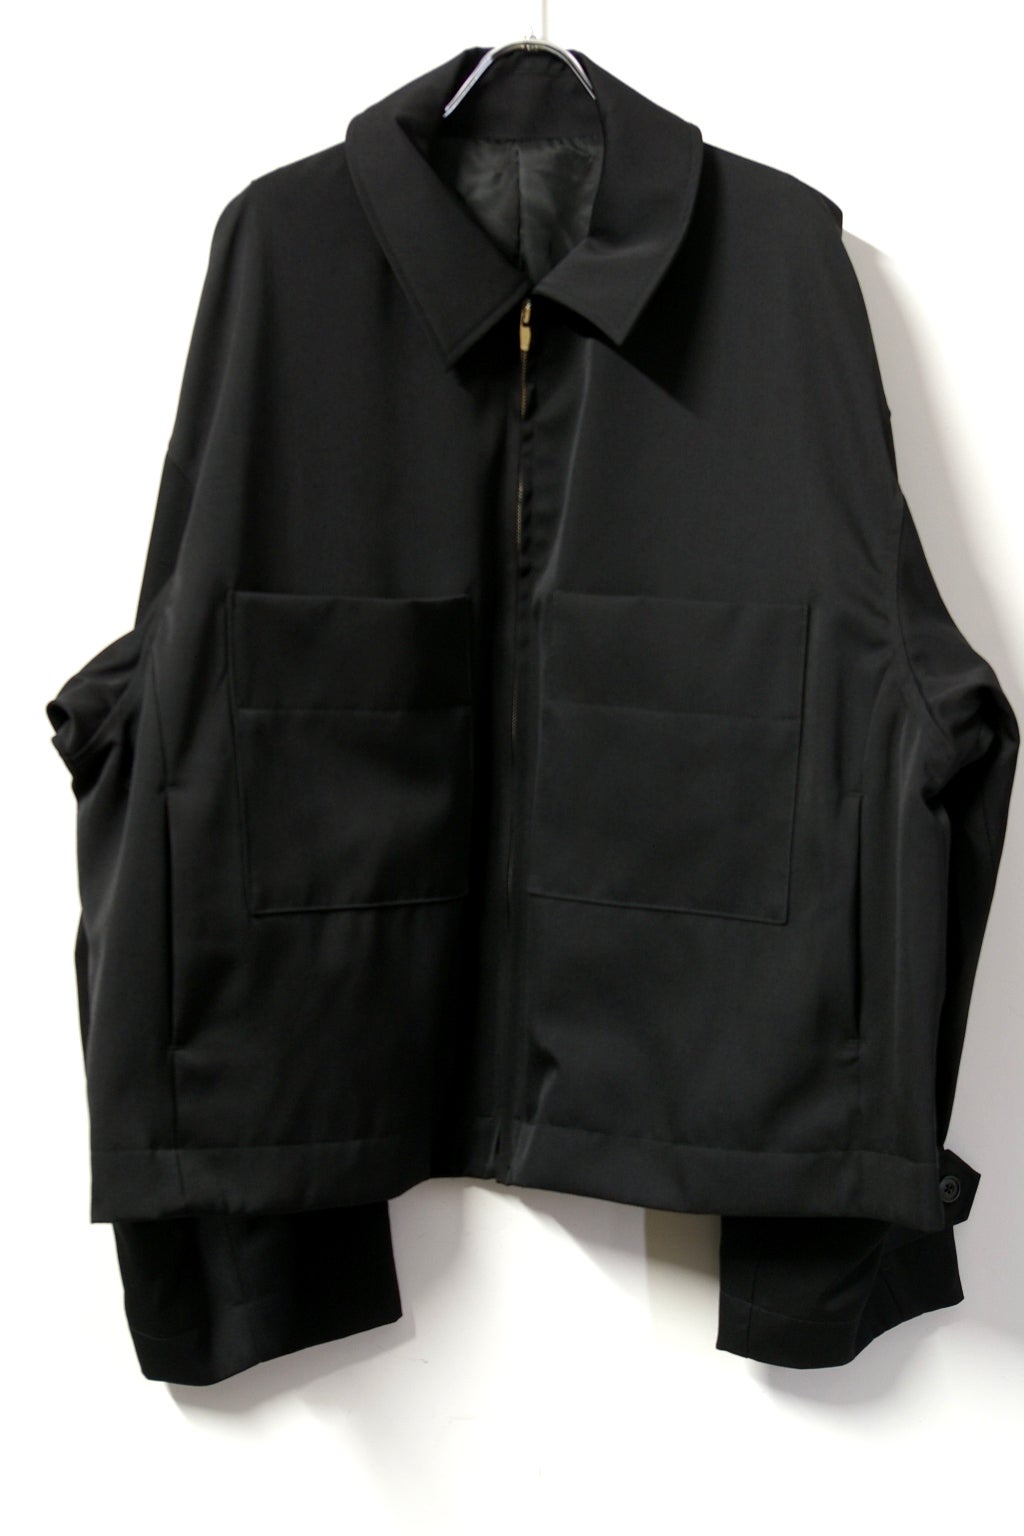 stein(シュタイン)/OVER SLEEVE DRIZZLER JACKET/Black 通販 取り扱い